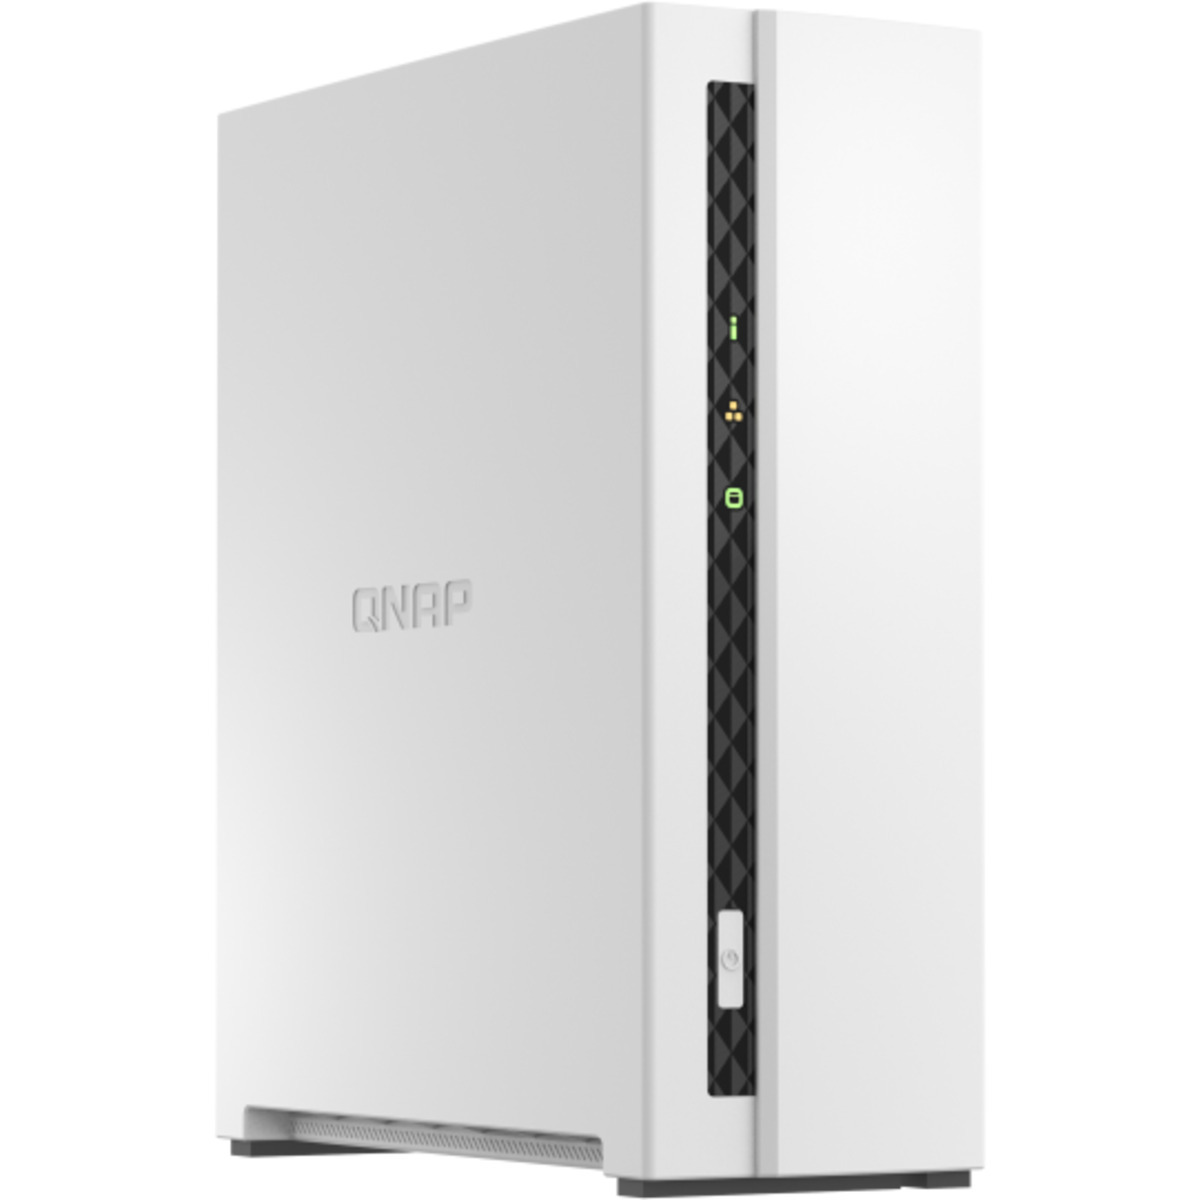 QNAP TS-133 14tb 1-Bay Desktop Personal / Basic Home / Small Office NAS - Network Attached Storage Device 1x14tb Seagate IronWolf Pro ST14000NT001 3.5 7200rpm SATA 6Gb/s HDD NAS Class Drives Installed - Burn-In Tested TS-133